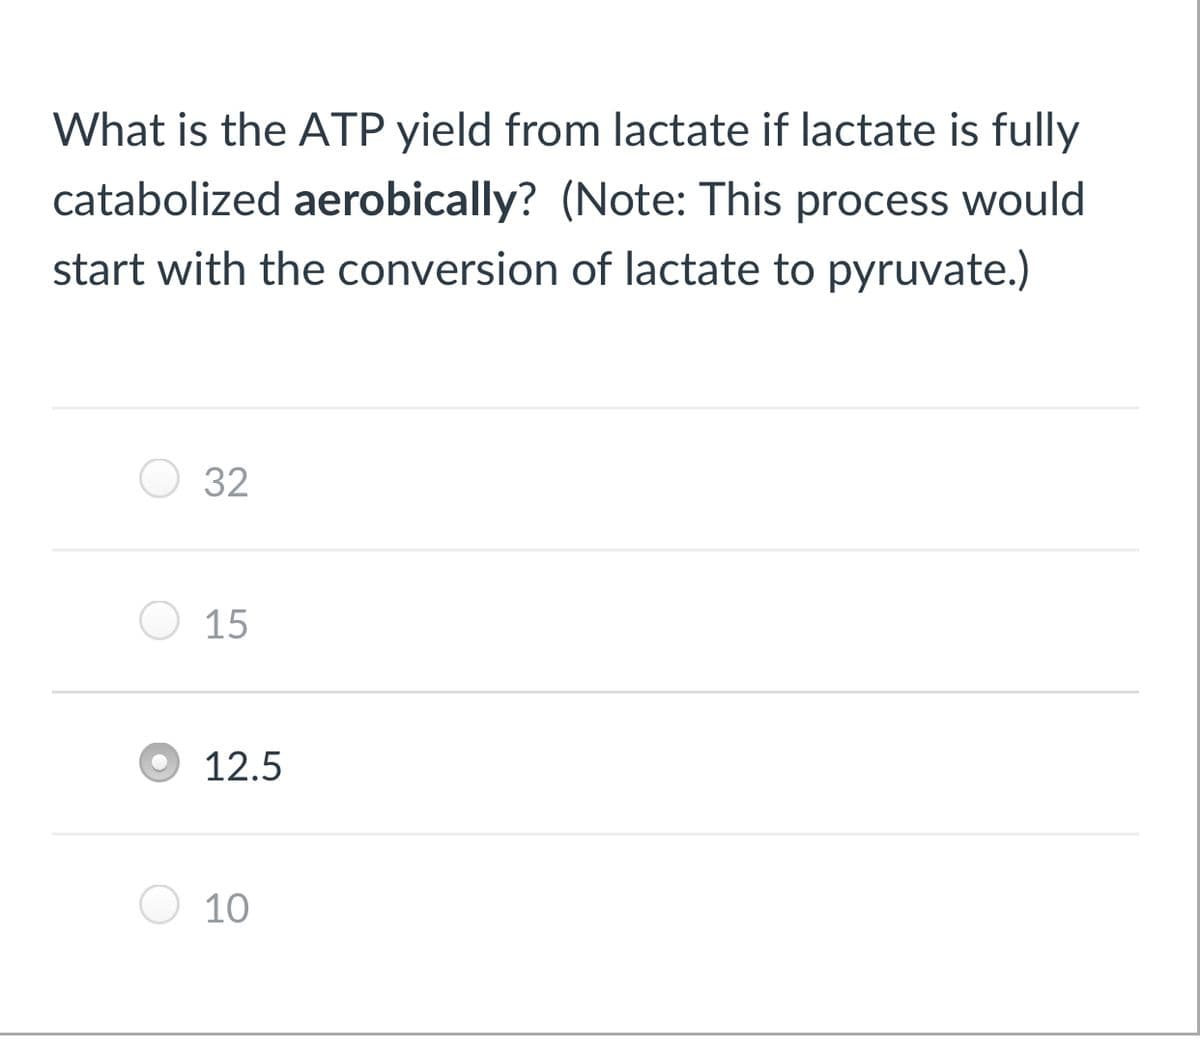 What is the ATP yield from lactate if lactate is fully
catabolized aerobically? (Note: This process would
start with the conversion of lactate to pyruvate.)
32
O 15
12.5
10
